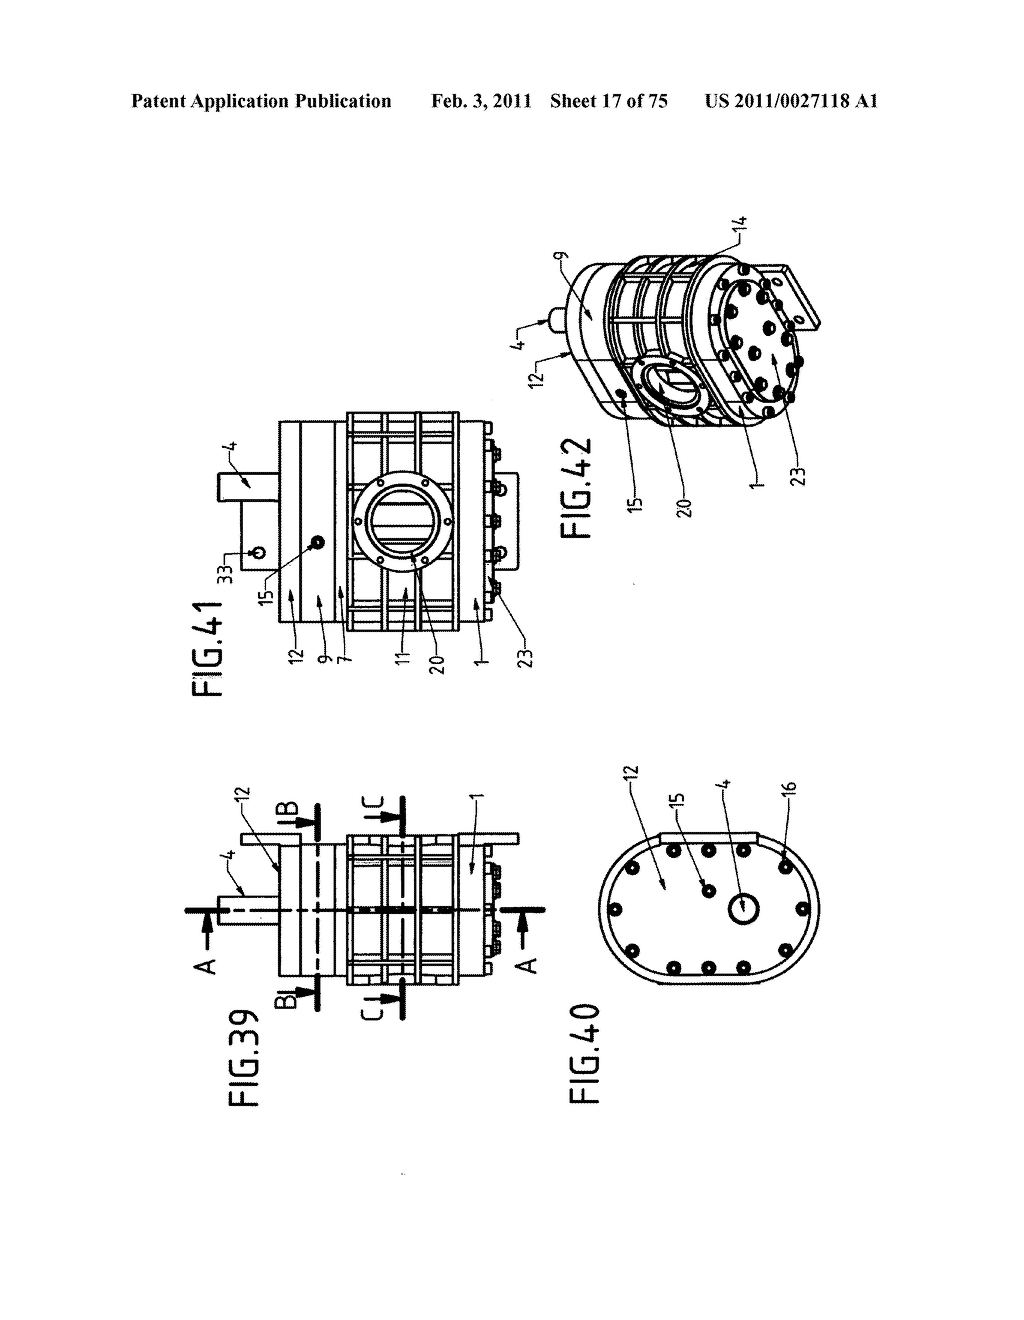 DEVICE WITH ROTARY PISTONS THAT CAN BE USED AS A COMPRESSOR, A PUMP, A VACUUM PUMP, A TURBINE, A MOTOR AND AS OTHER DRIVING AND DRIVEN HYDRAULIC-PNEUMATIC MACHINES - diagram, schematic, and image 18